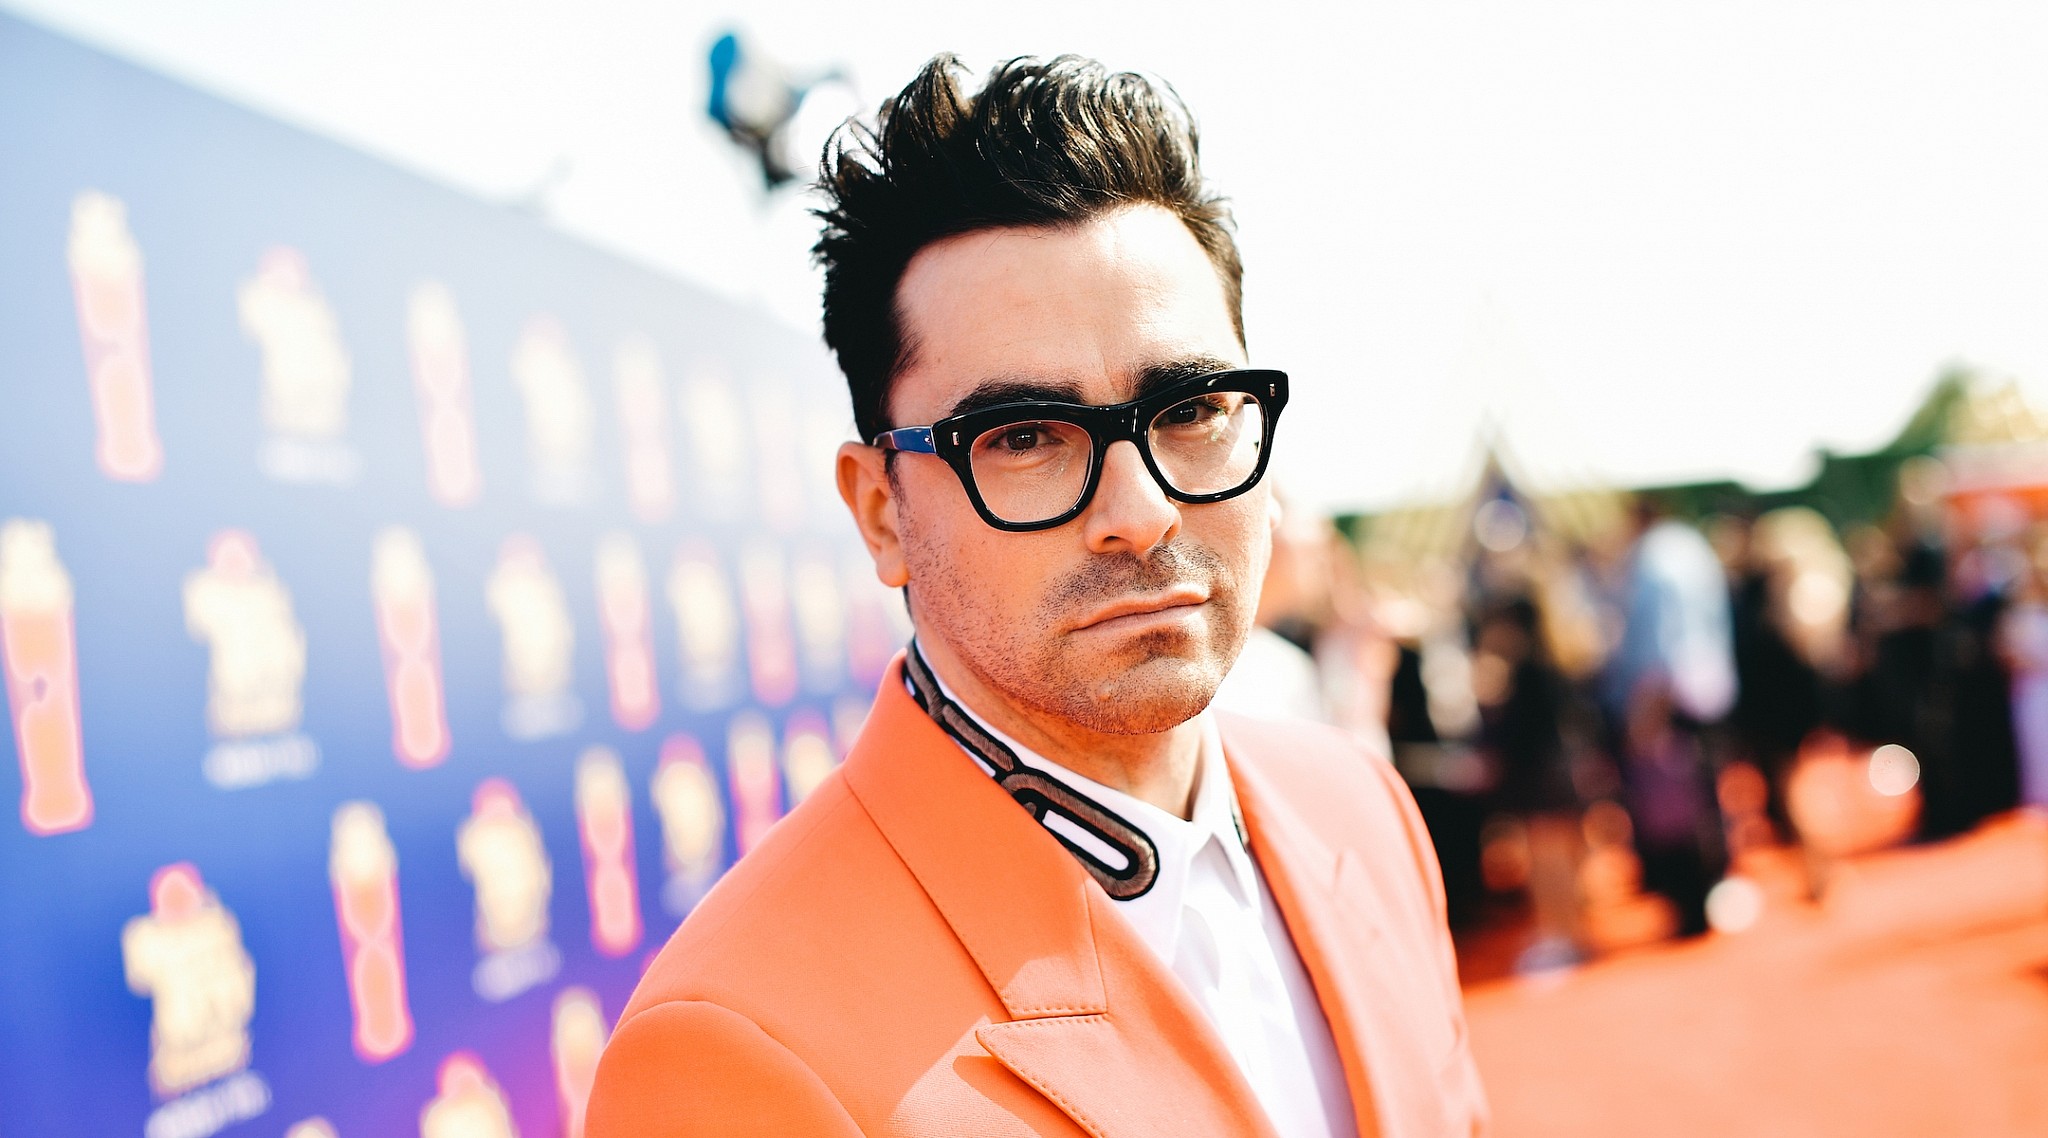 Schitt's Creek' star Dan Levy to be honored by GLAAD | The Times of Israel